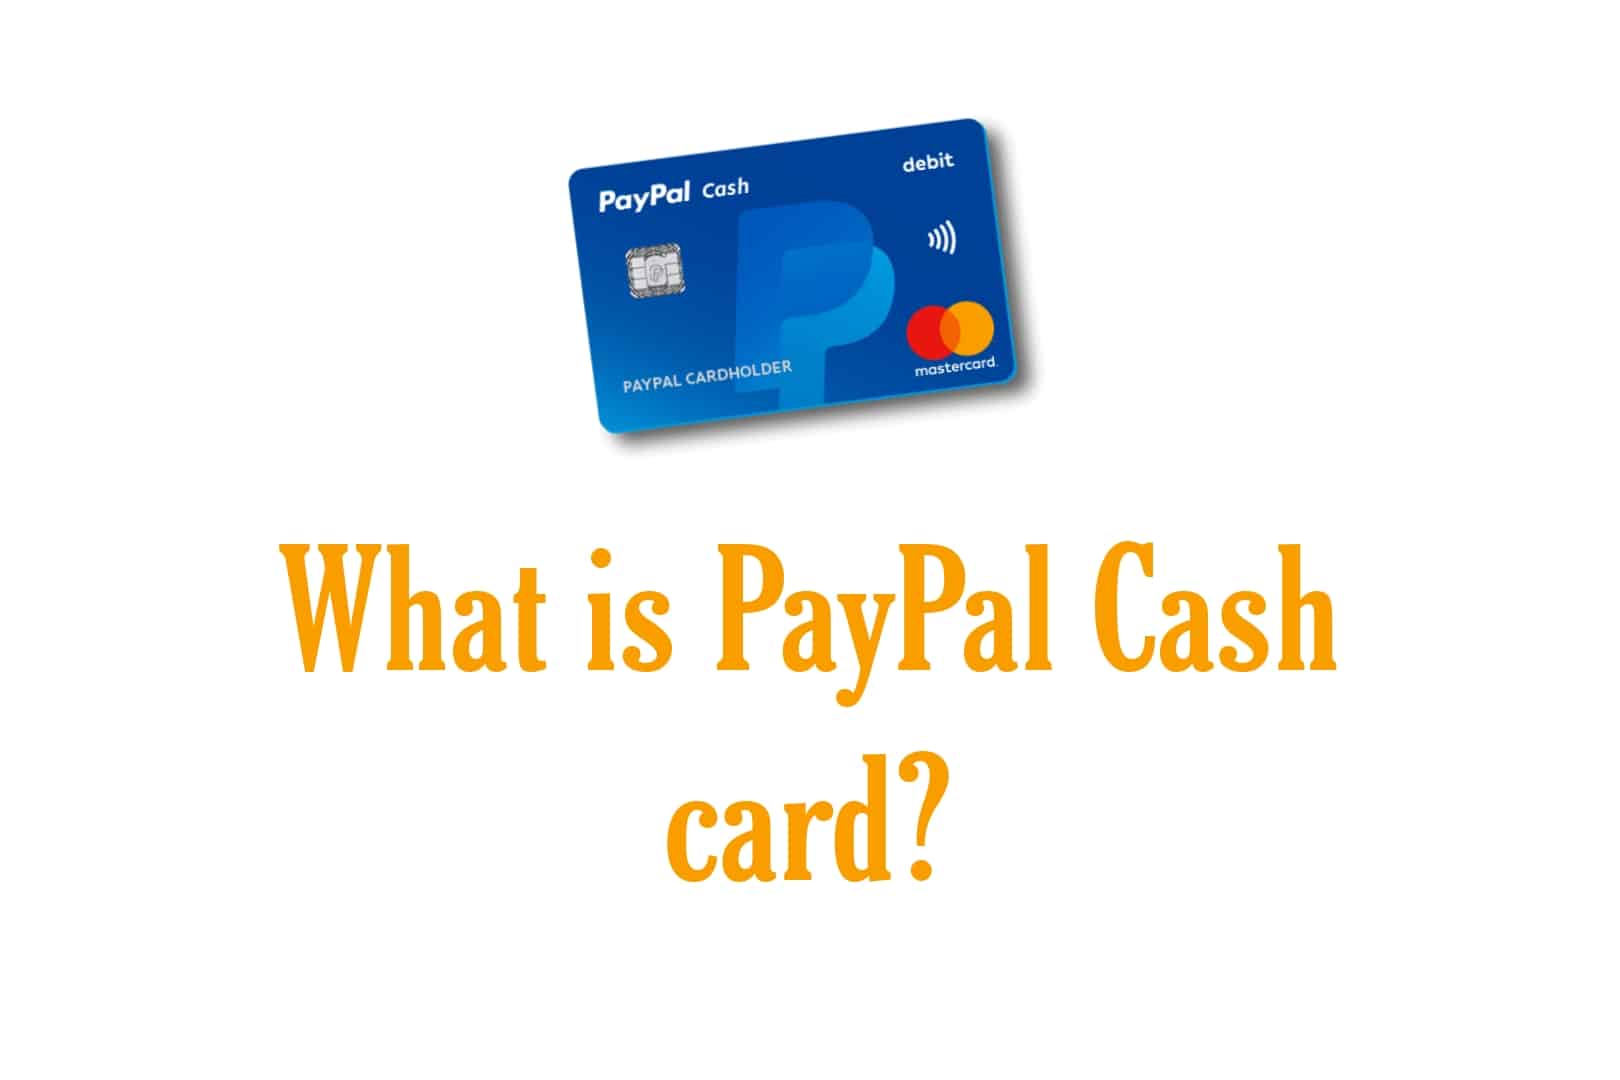 What is a PayPal Cash card?